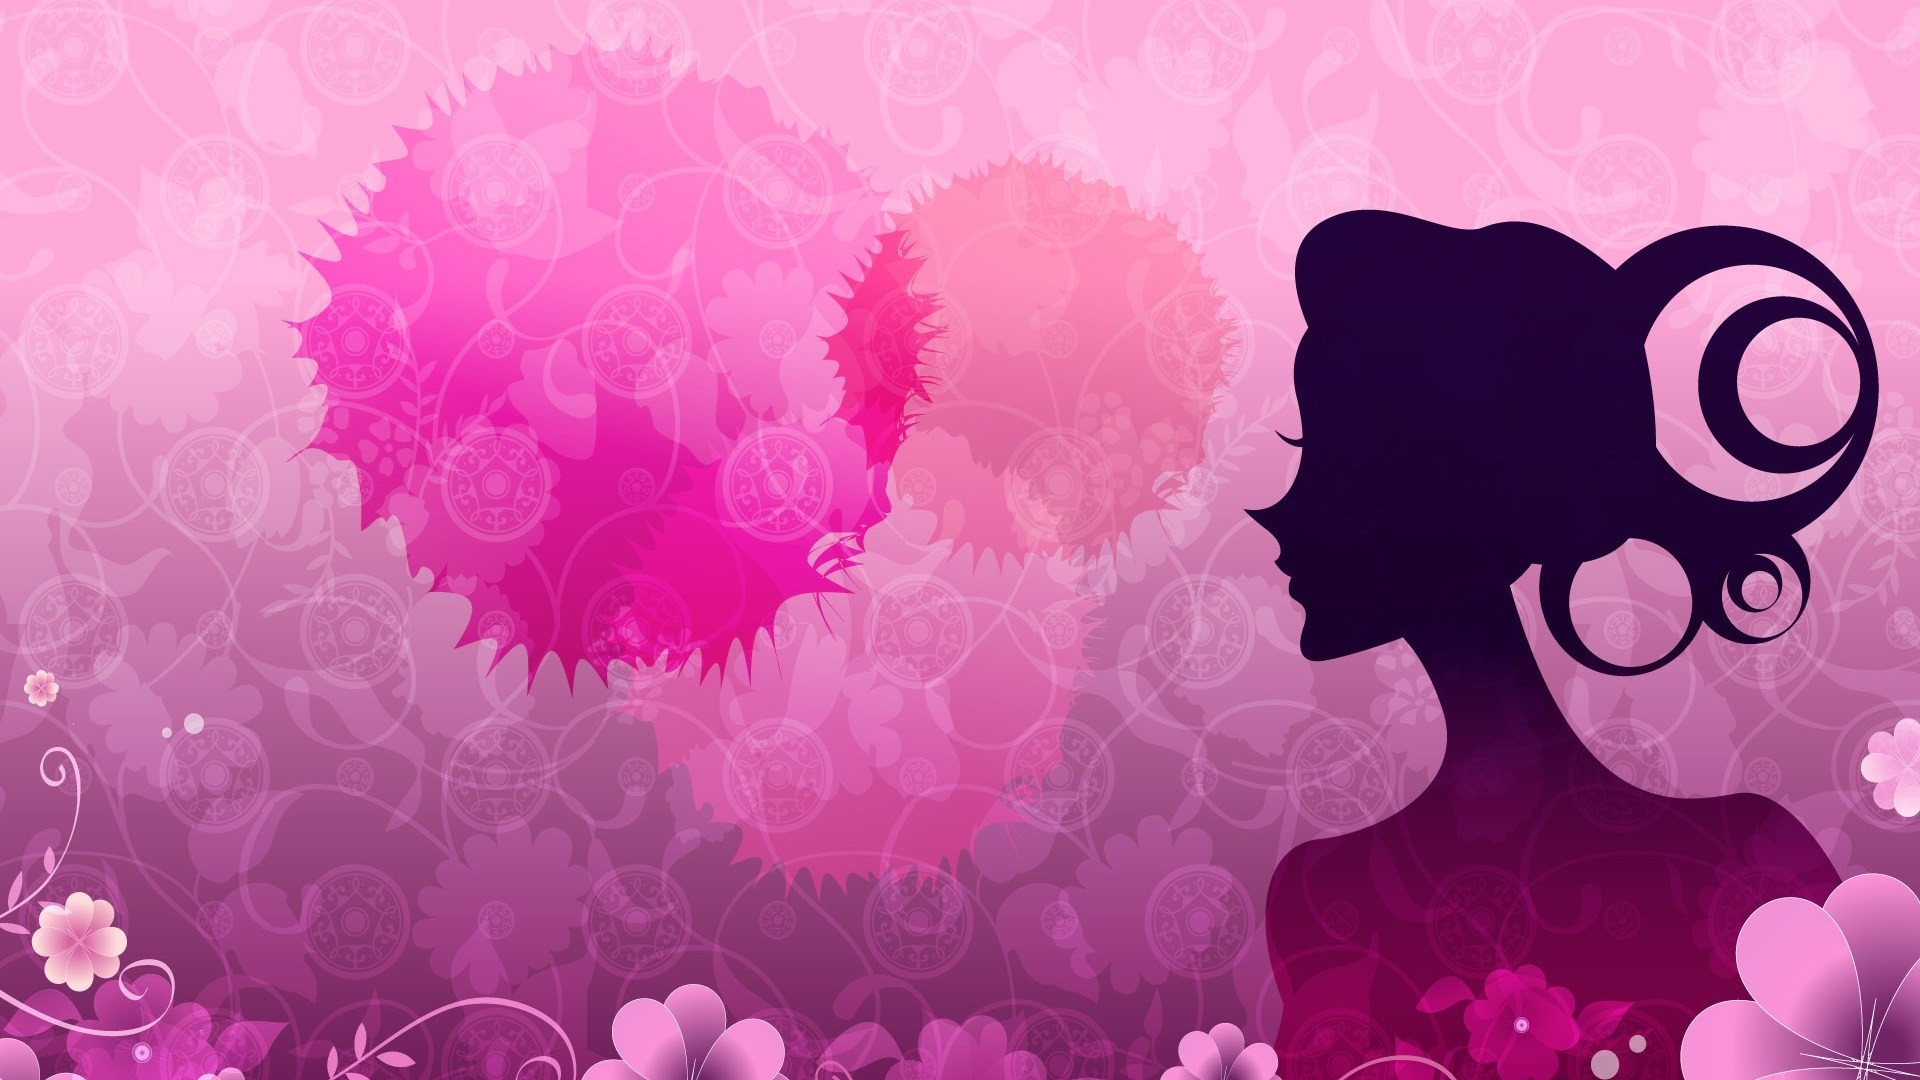 Perfect Girly Wallpapers Free Download Wallpapers - Debut Invitation  Background Pink - 1920x1080 Wallpaper 